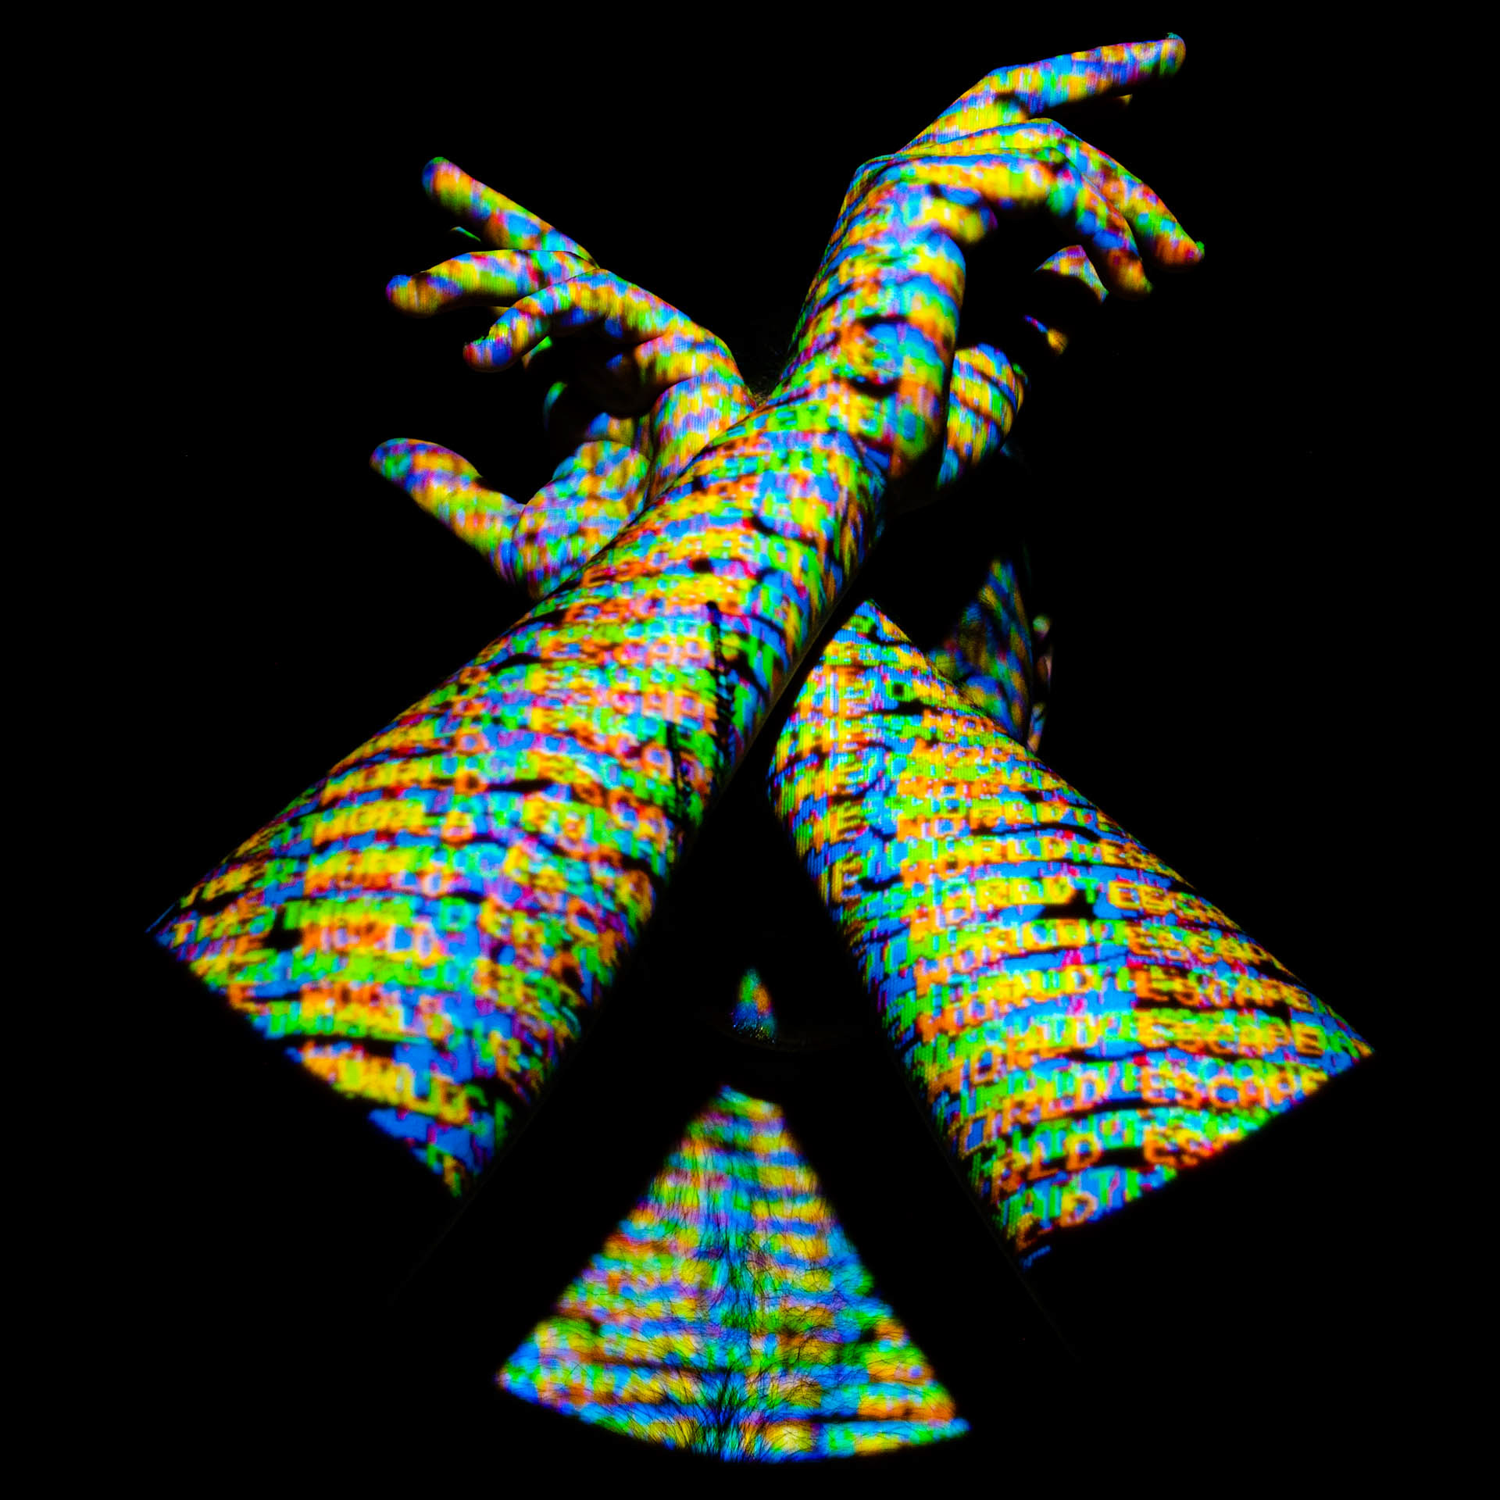 Colour image of a portrait of a man covering his face with crossed arms. Projected digital imagery covers his face and arms. The words "escape the world" are displayed on his skin.